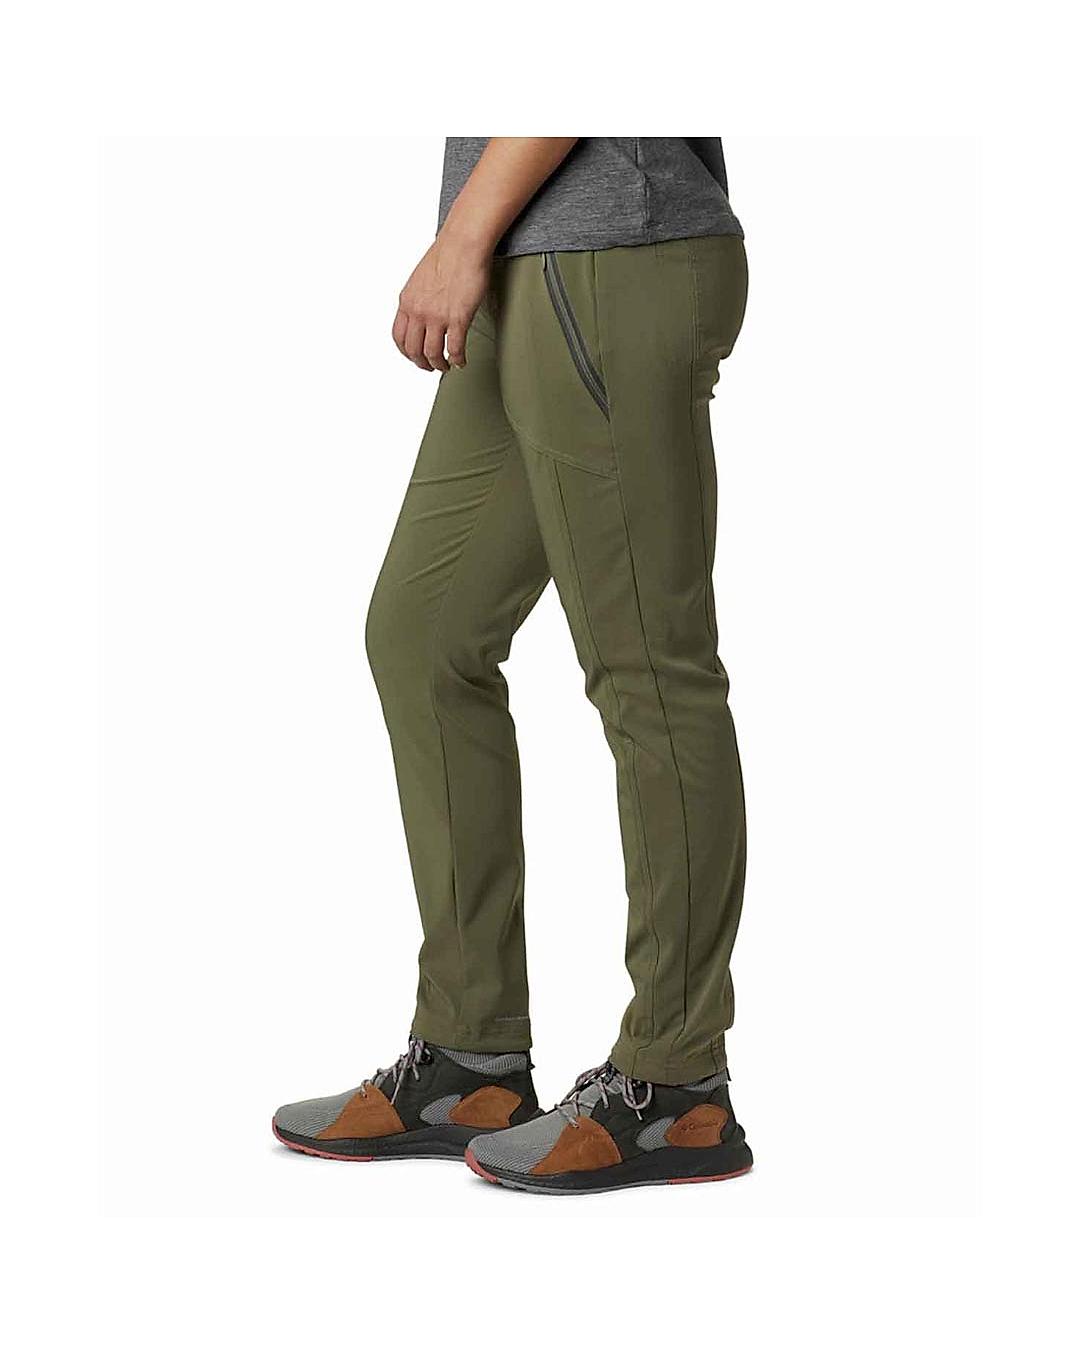 Buy Bryce Canyon II Pant for Women Online at Adventuras